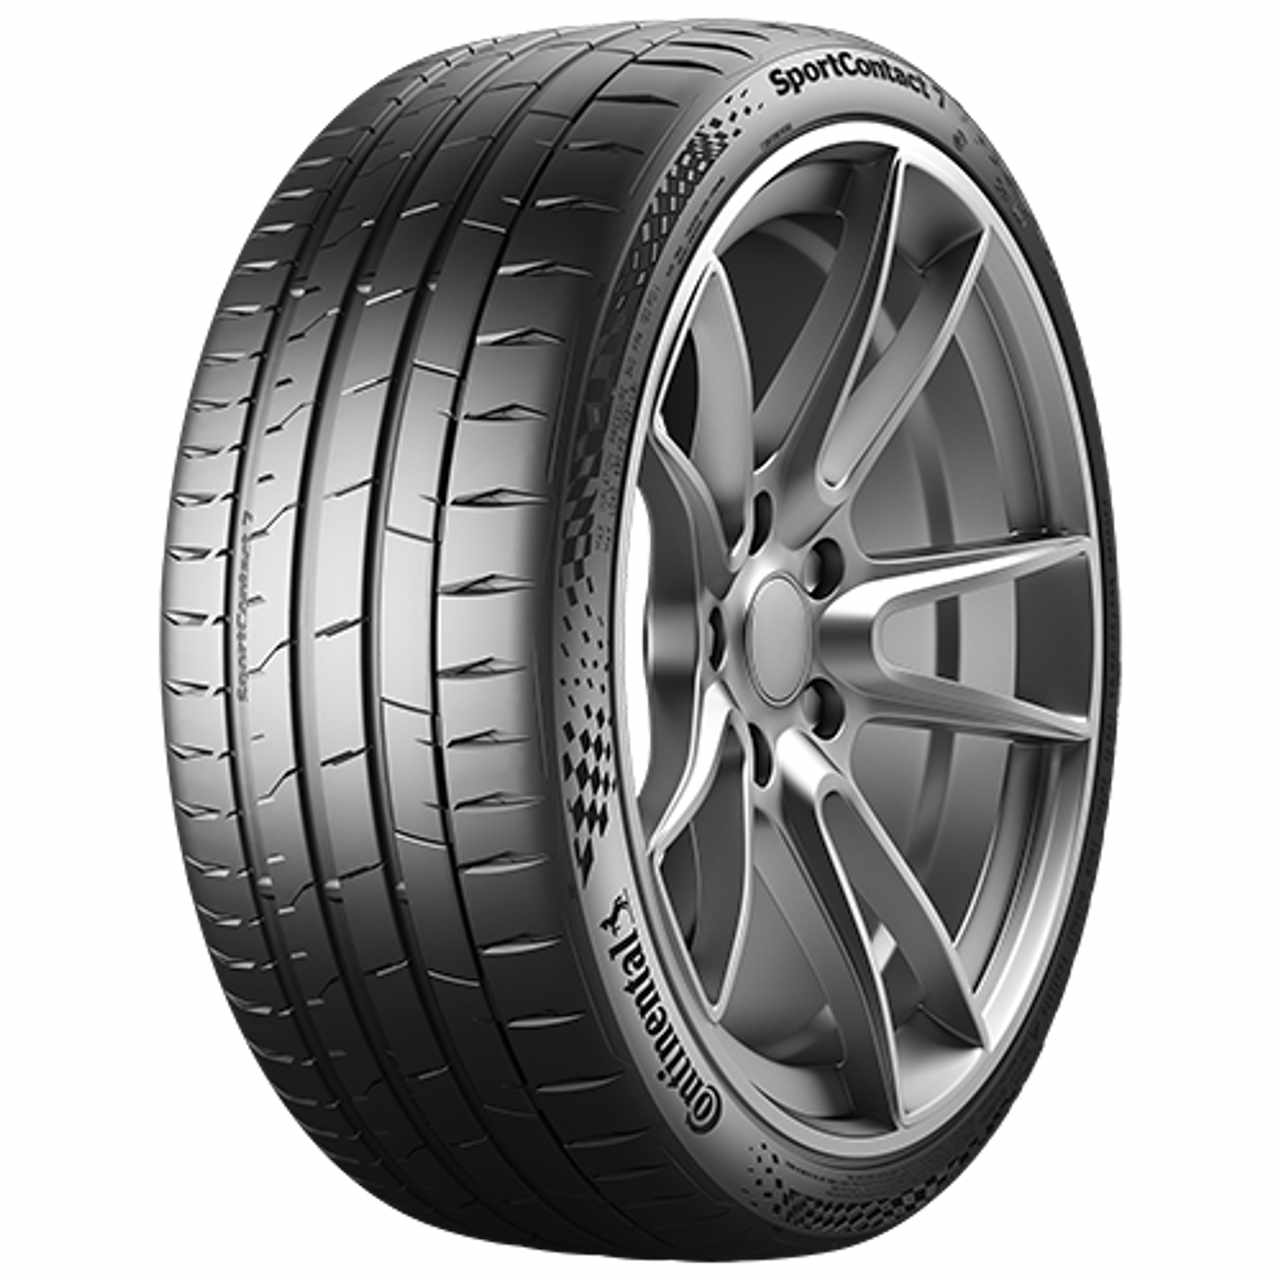 CONTINENTAL SPORTCONTACT 7 (*) (EVc) 225/45R18 95Y CONTISILENT FR BSW